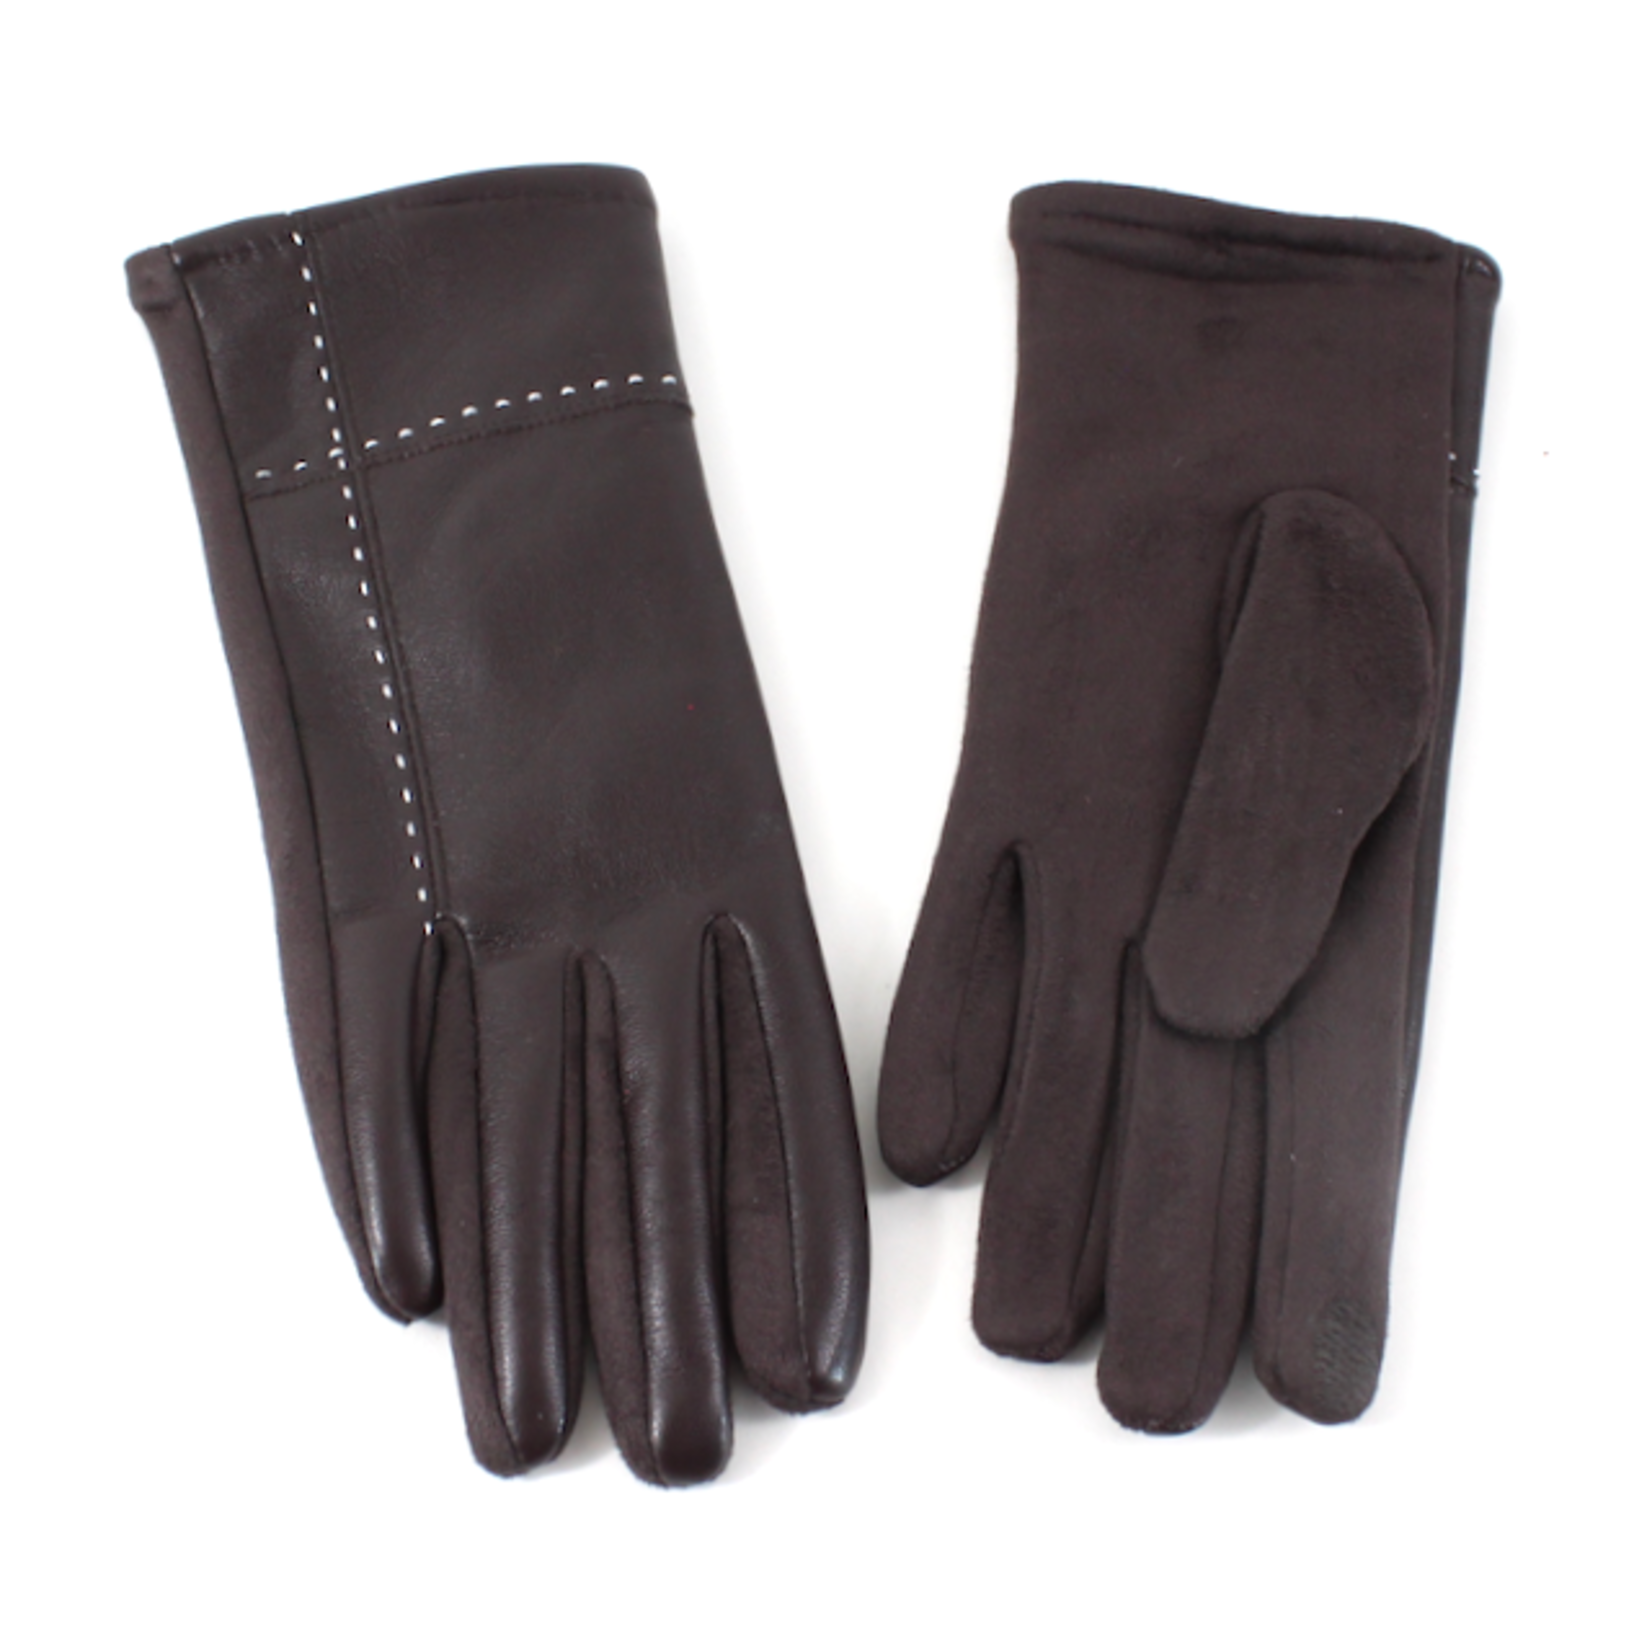 Pretty Persuasions Top Stitched Faux Lthr Touchscreen Gloves in Chocolate